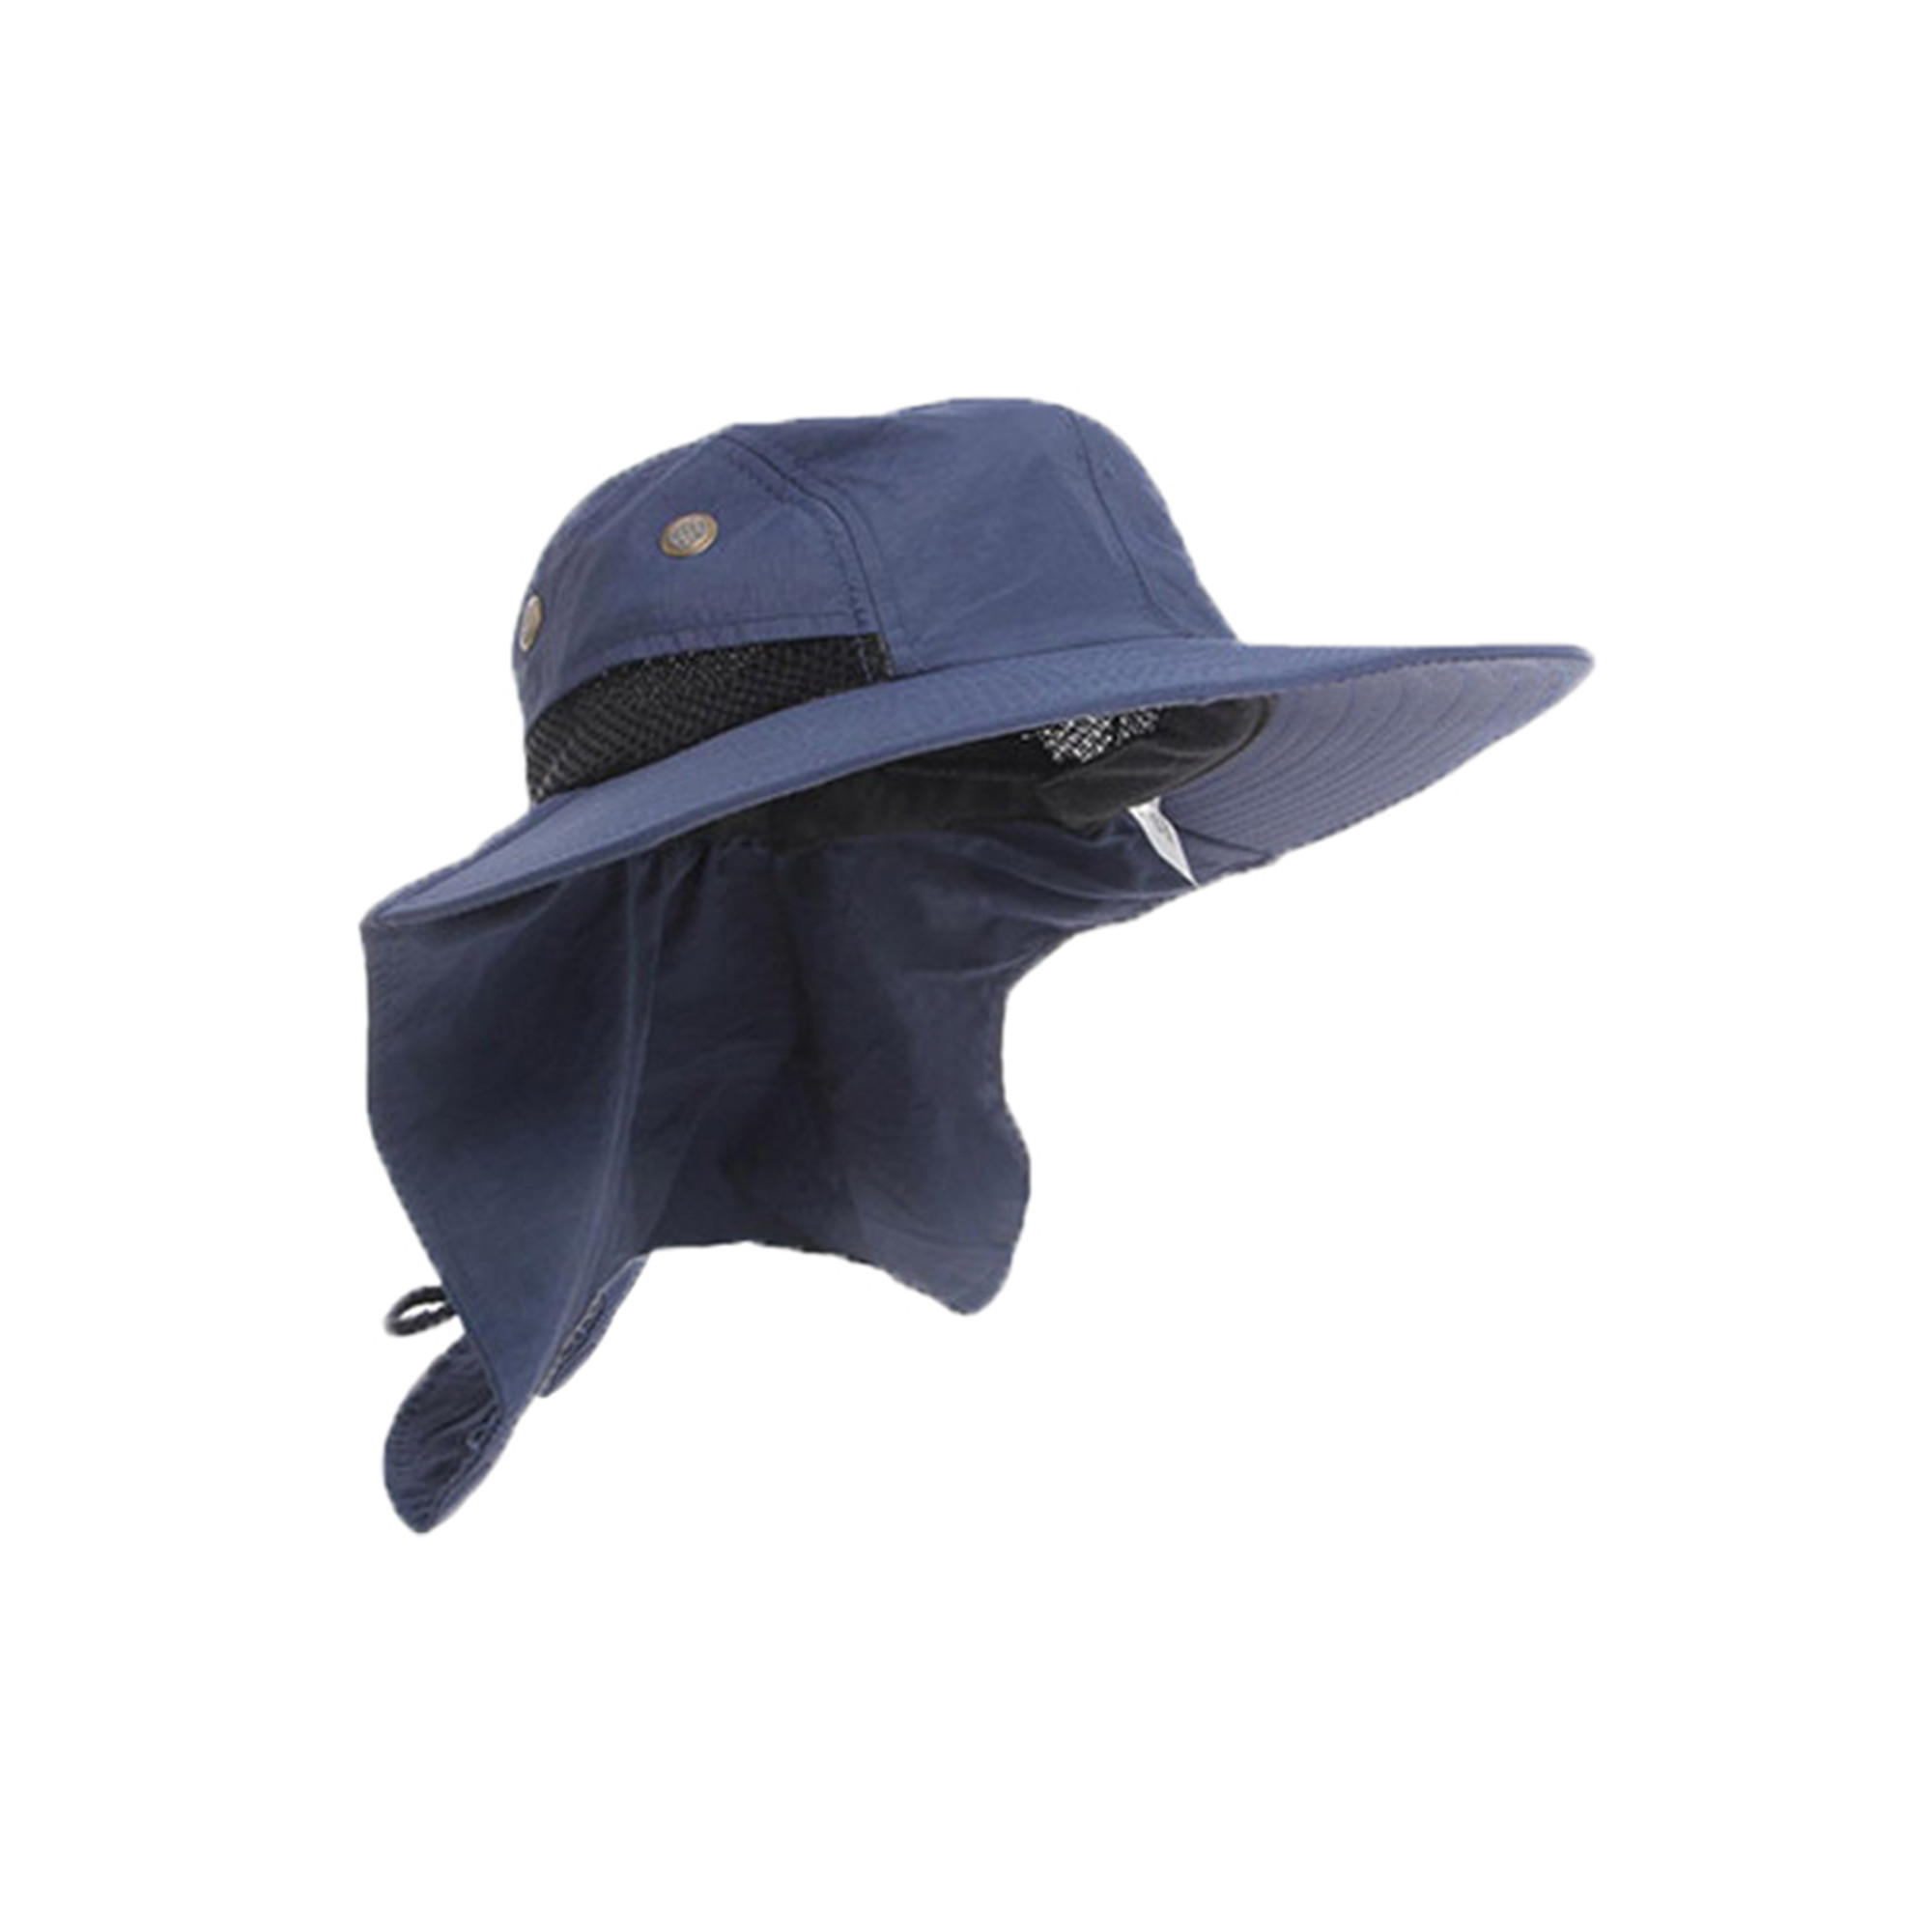 Sunisery Outdoor Fishing Hiking Boonie Snap Hat Brim Ear Neck Cover Sun Flap Cap - image 2 of 4